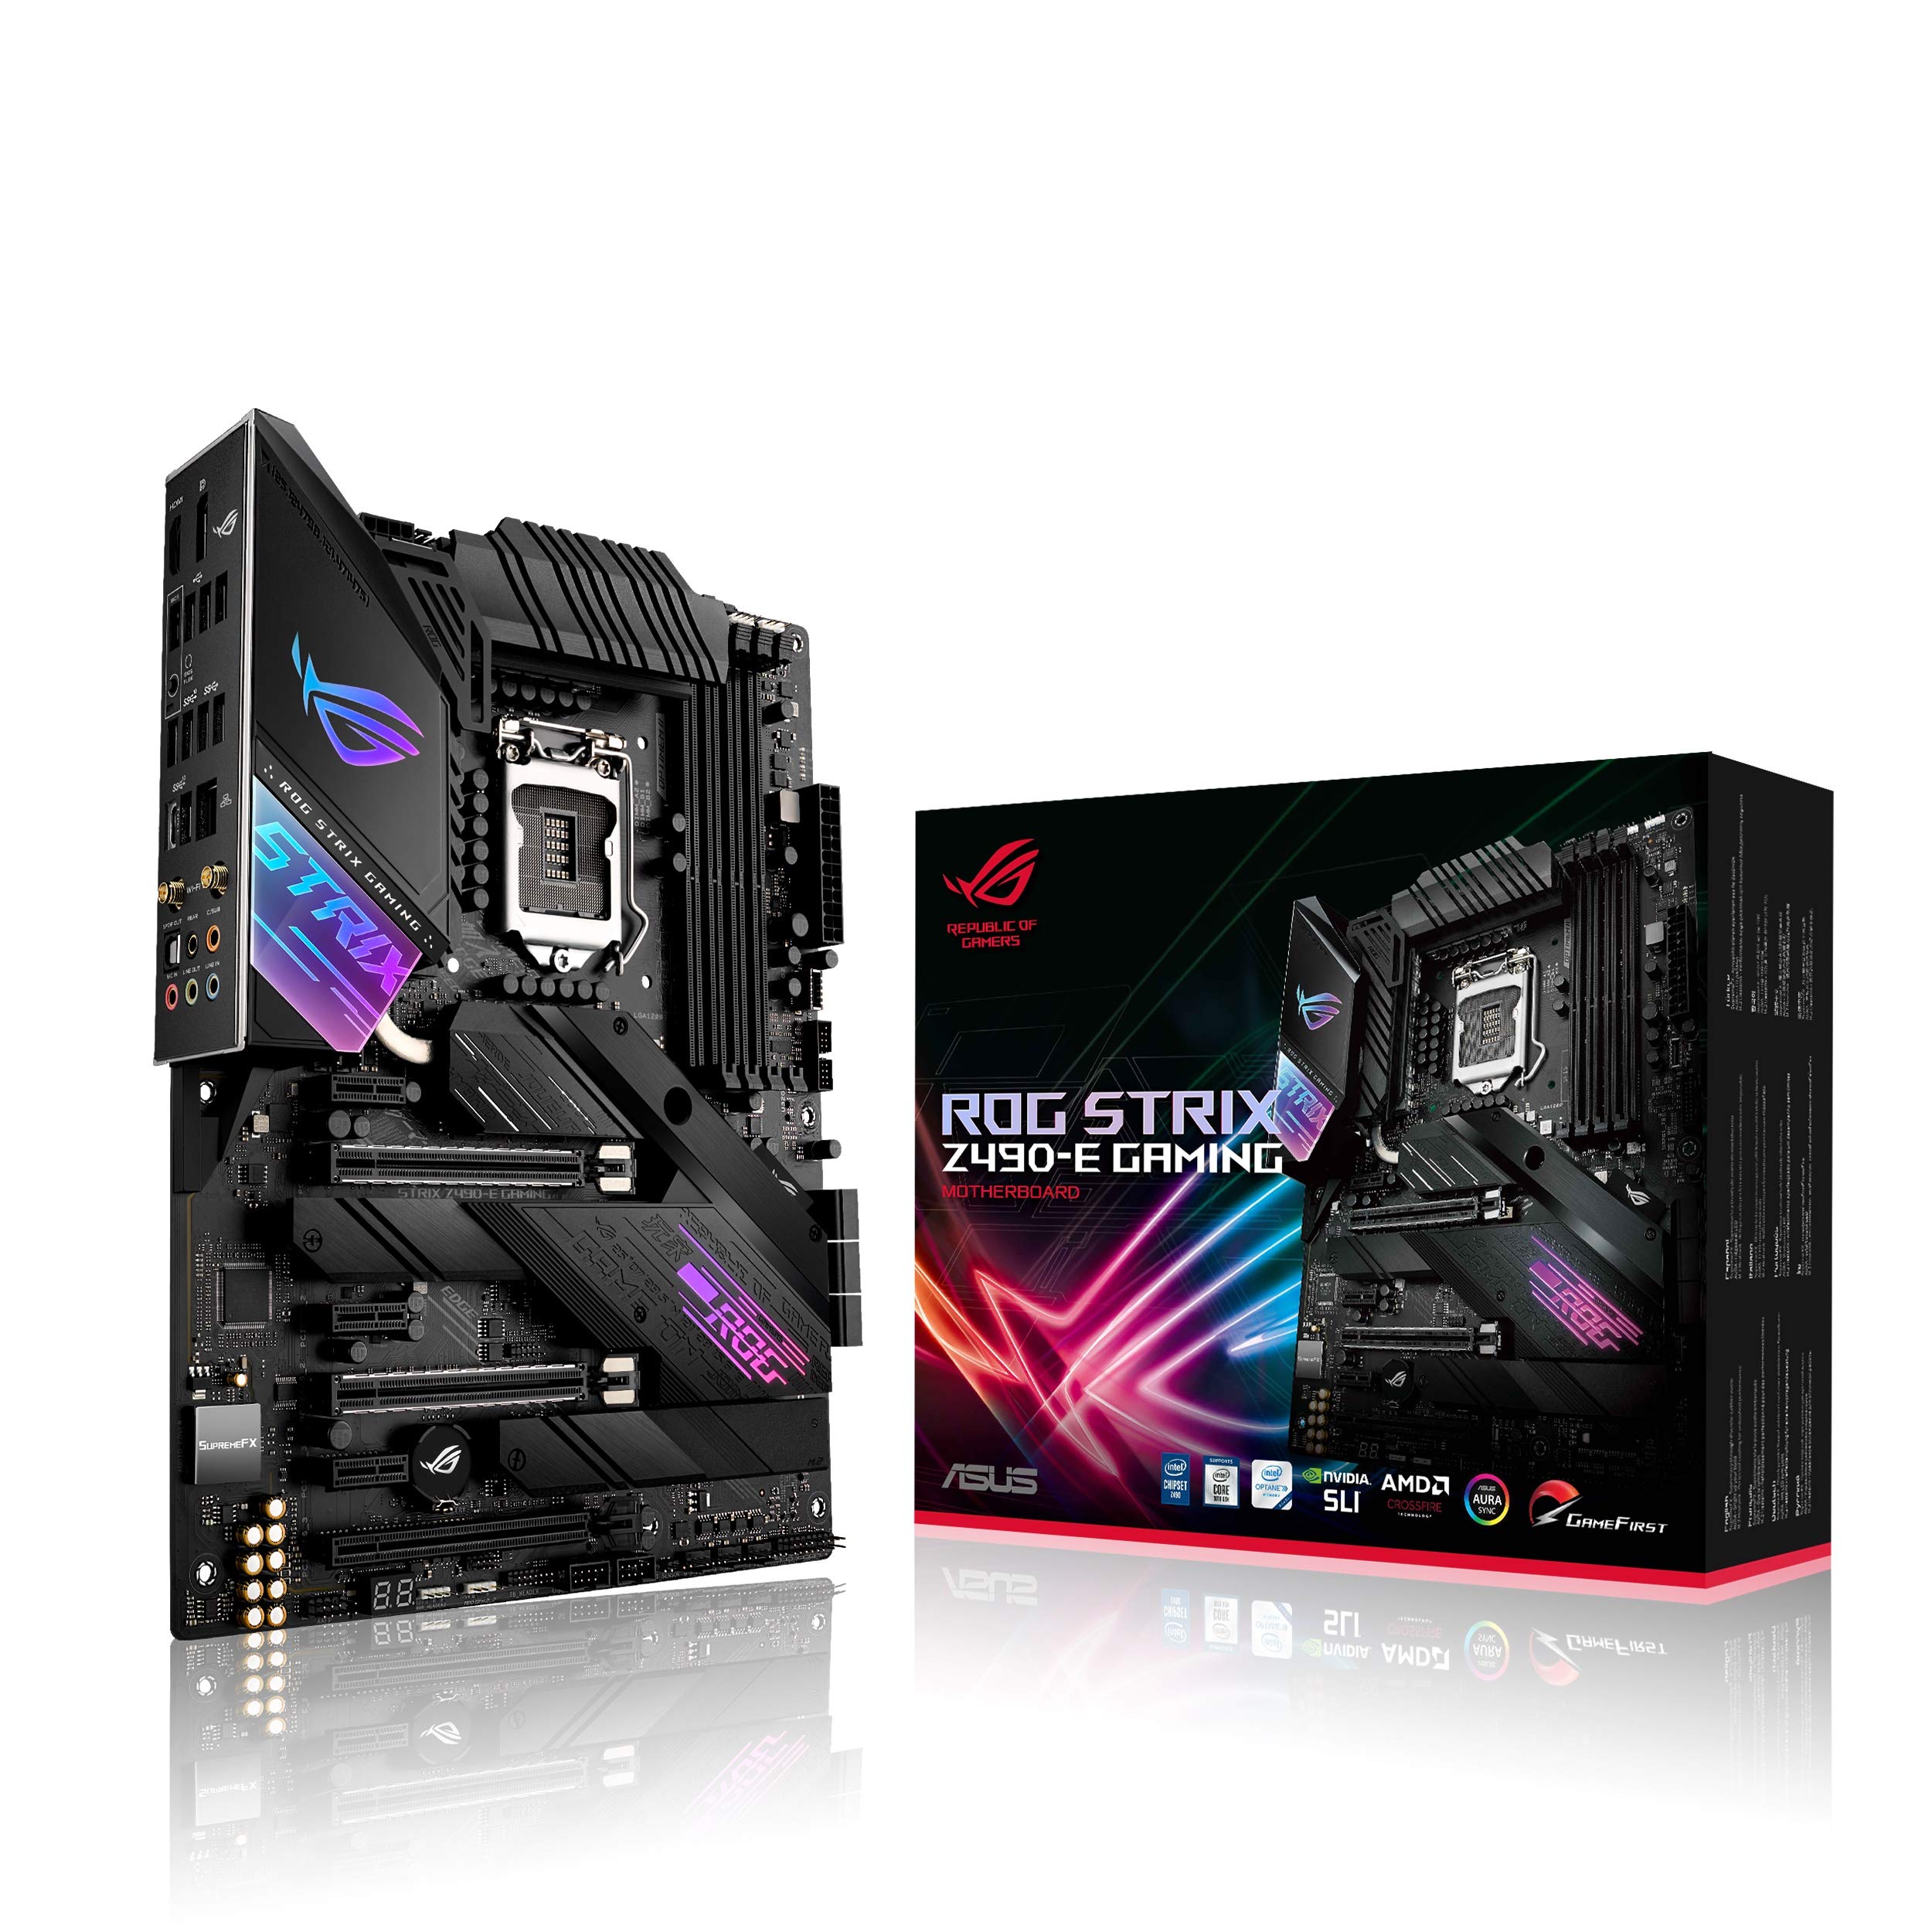 ASUS ROG Strix Z490-E Gaming Z490- WiFi 6 LGA 1200 Intel 10th Gen ATX Gaming Motherboard 142 Power Stages DDR4 4600 In